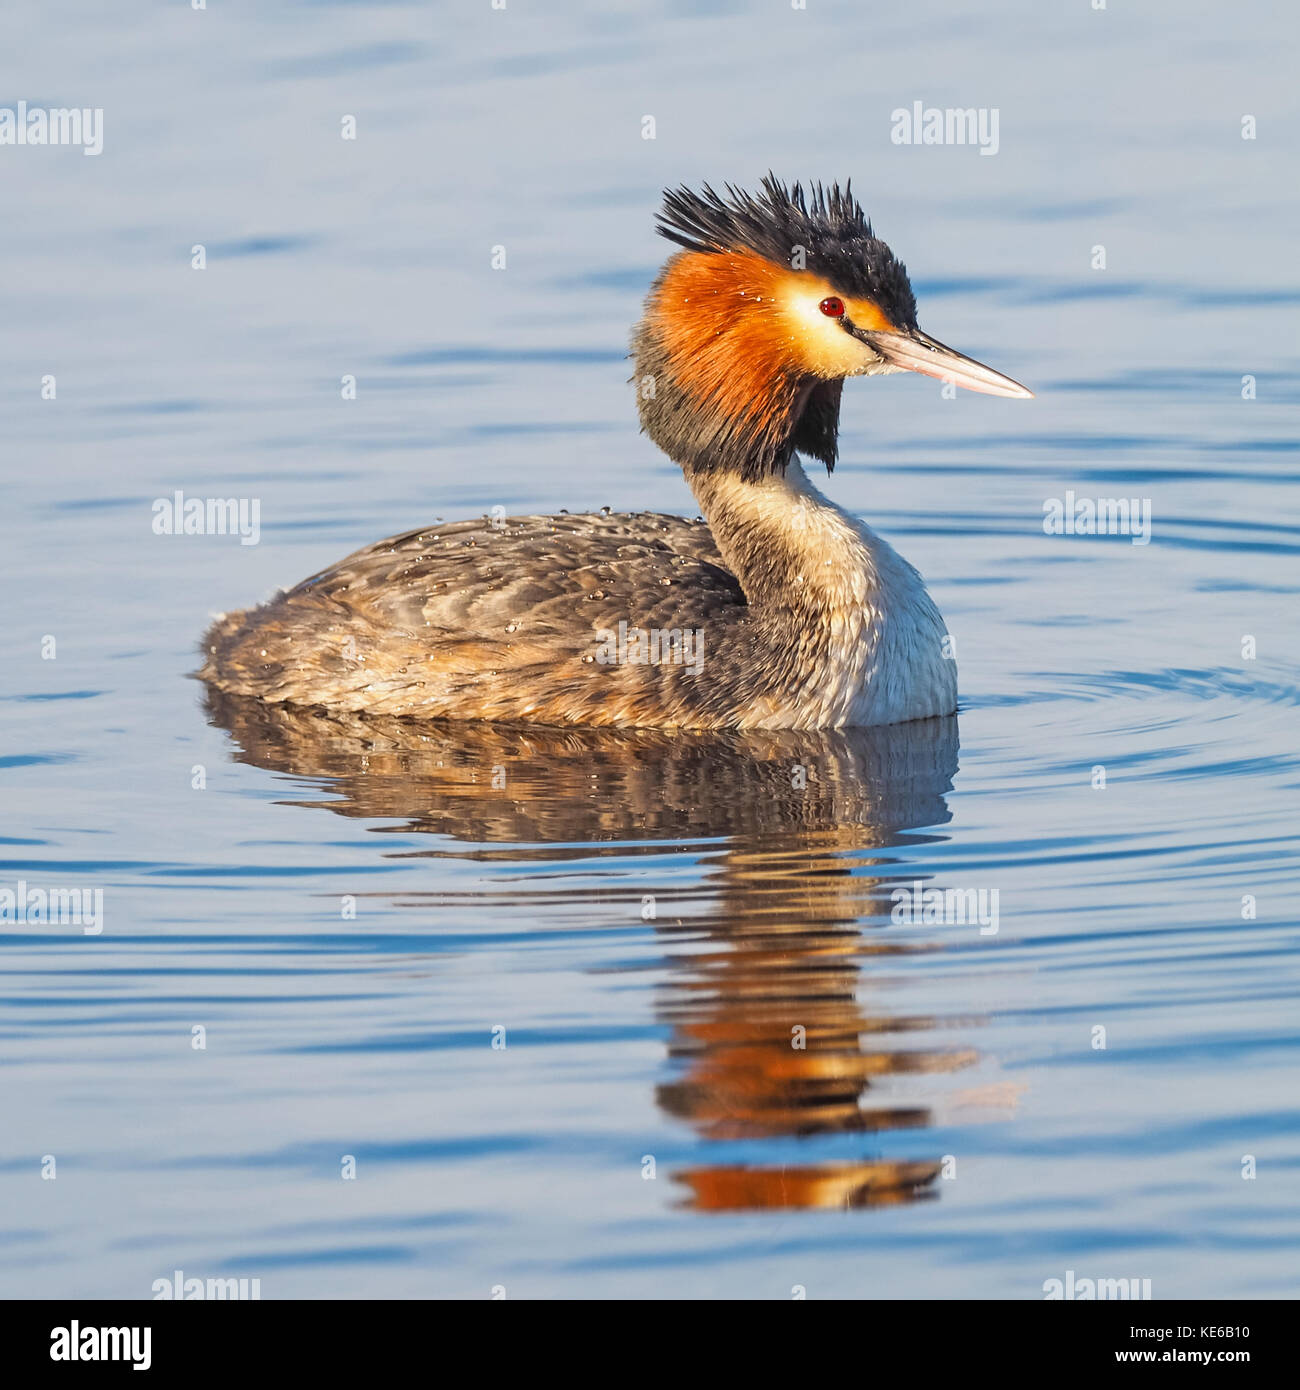 The Great Crested Grebe (Podiceps cristatus) is a member of the grebe family of water birds and is found in Europe, Africa, Asia and Australia. Stock Photo